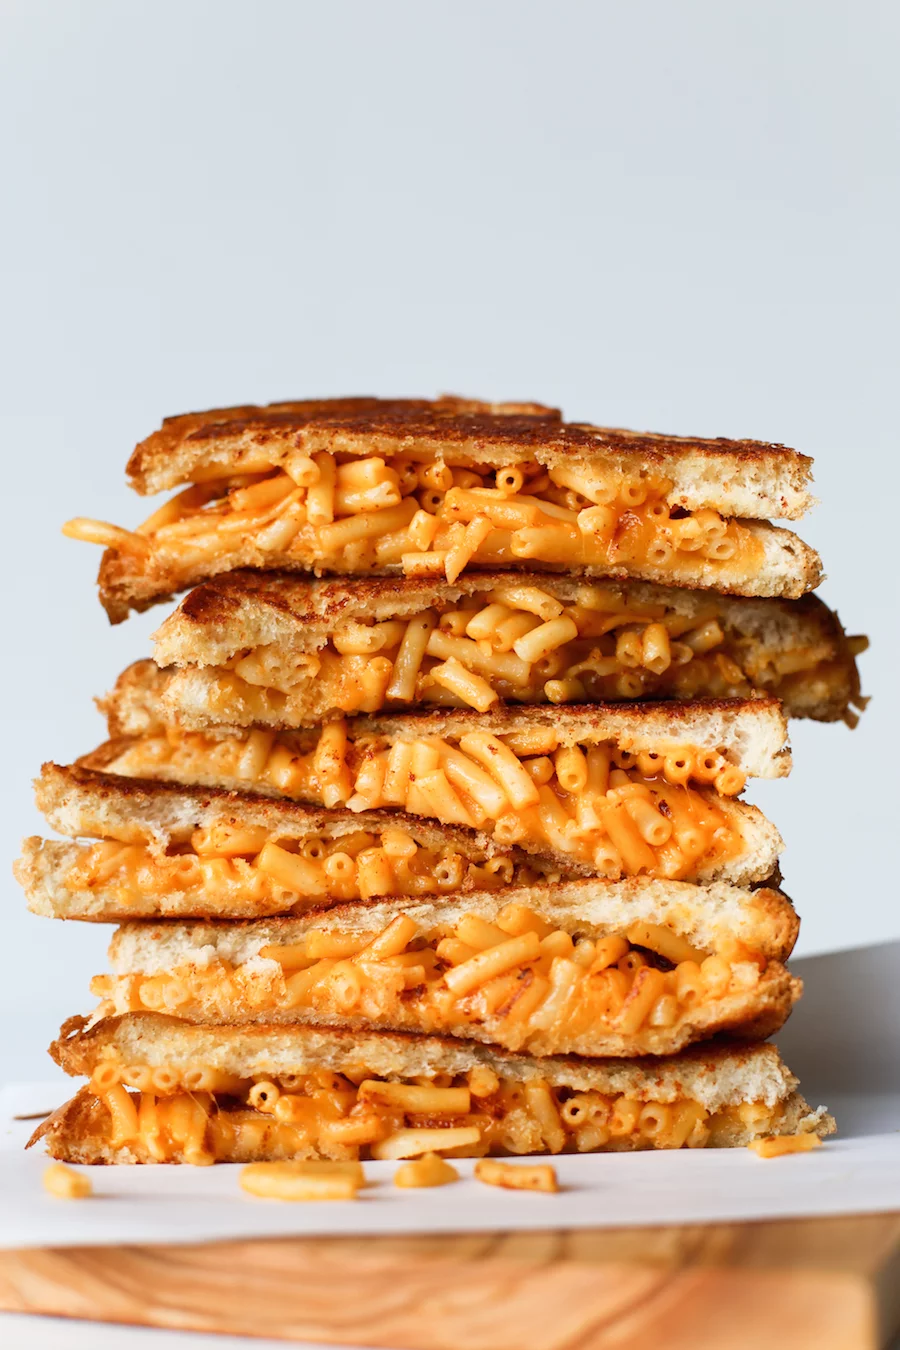 Mac And Cheese Grilled Cheese Sandwich // This is one comfort food stuffed into another comfort food and then grilled to perfection! // saltycanary.com